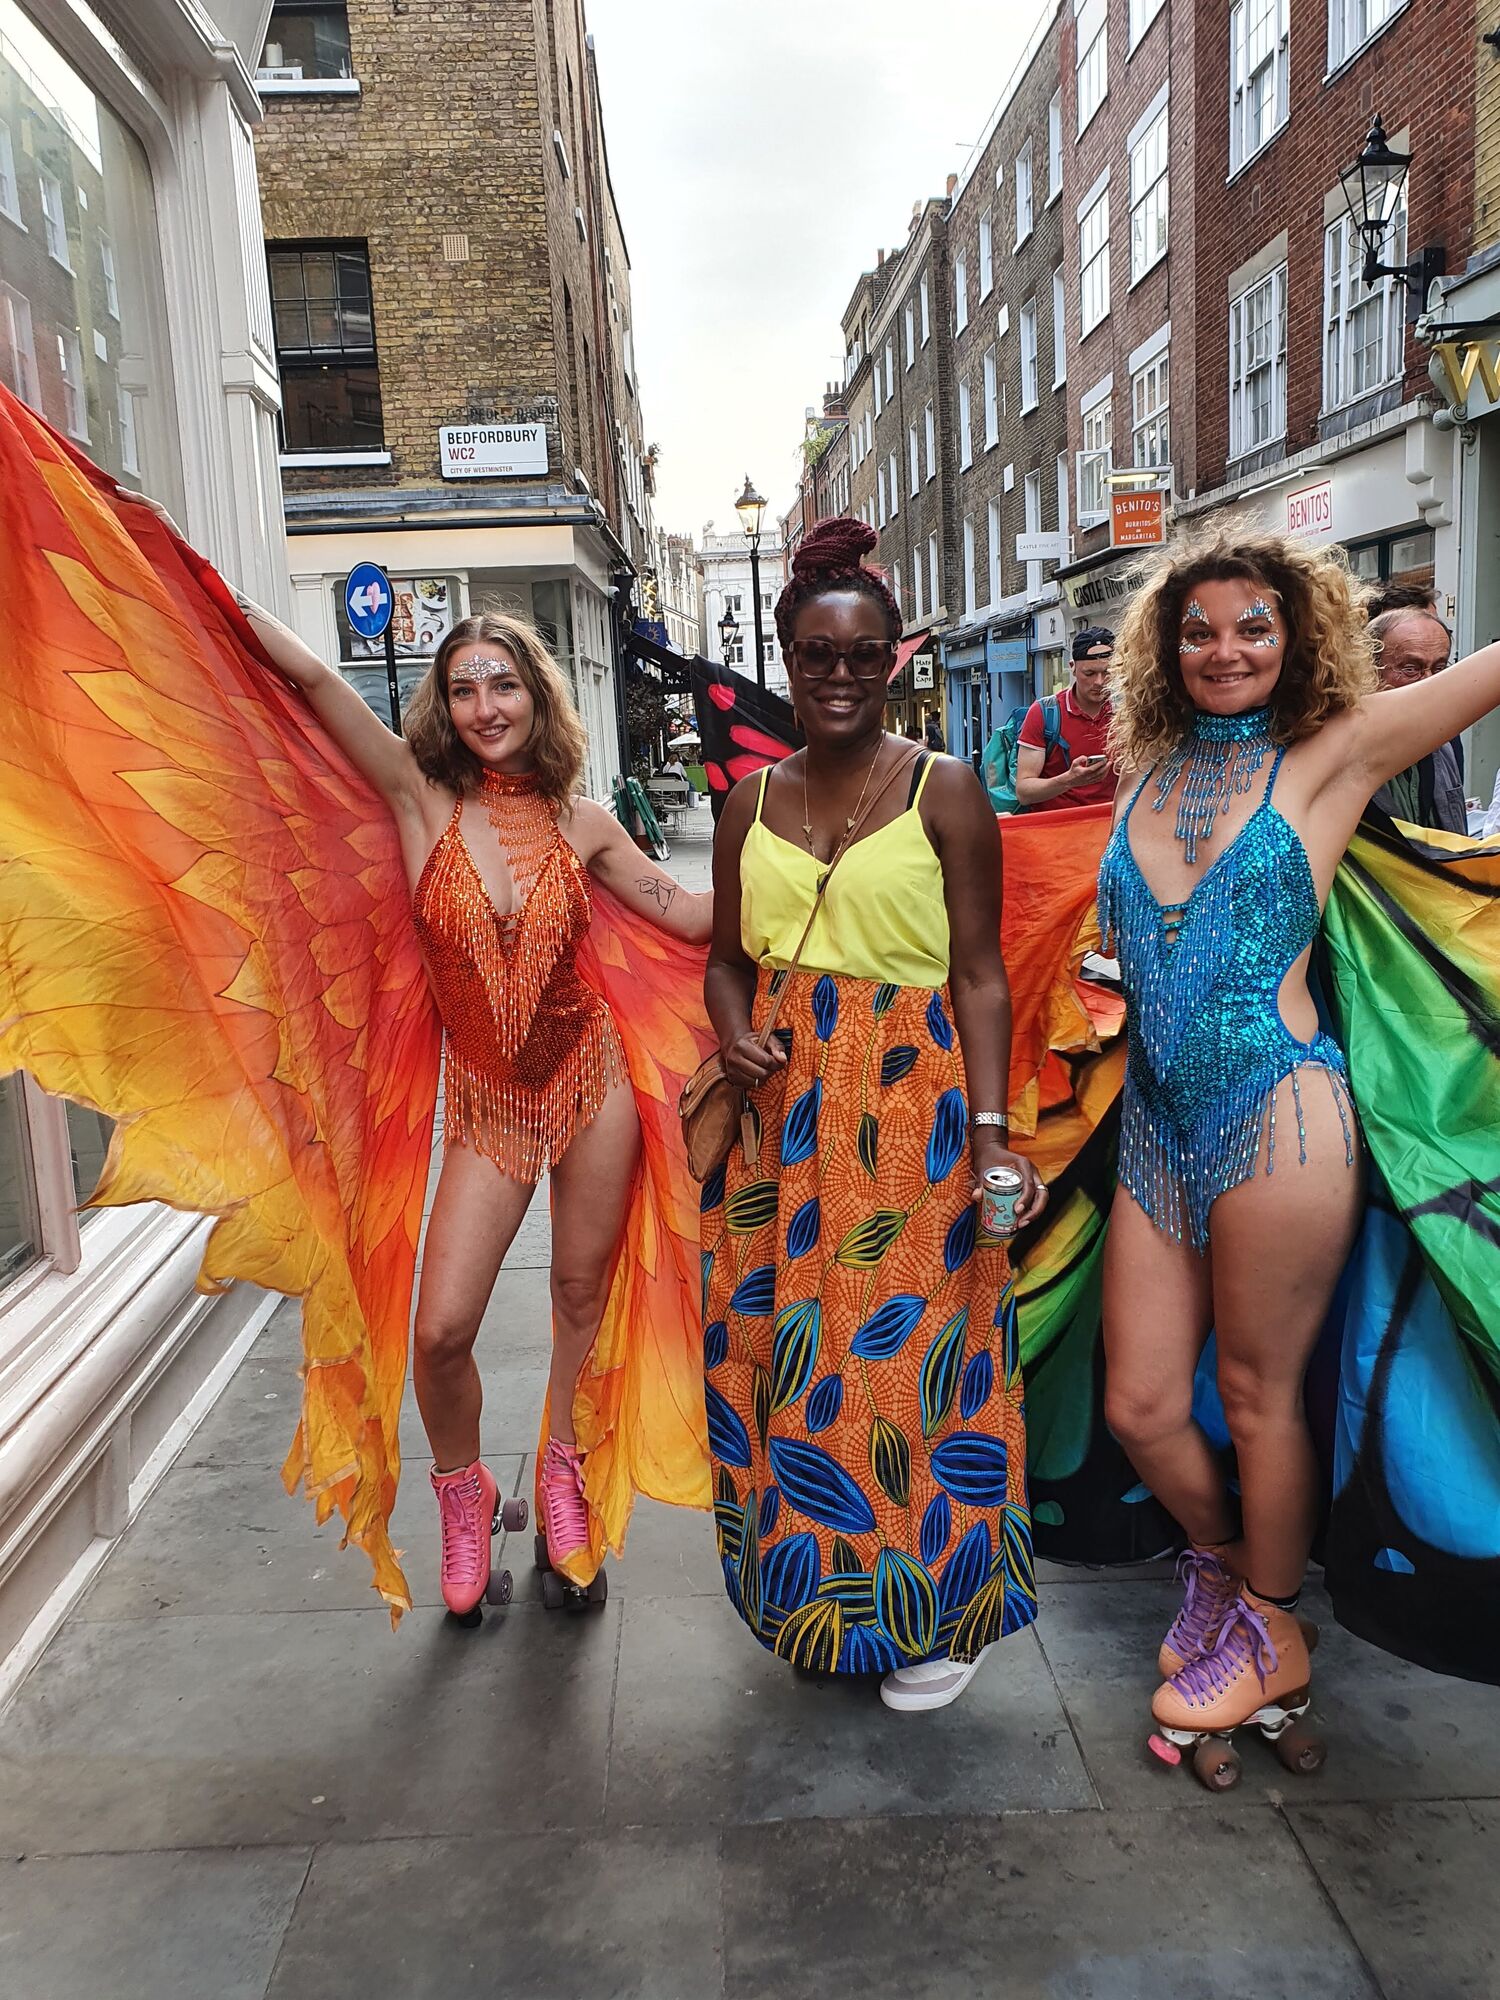 lady in bright by kala x surrounded by carnival dancers